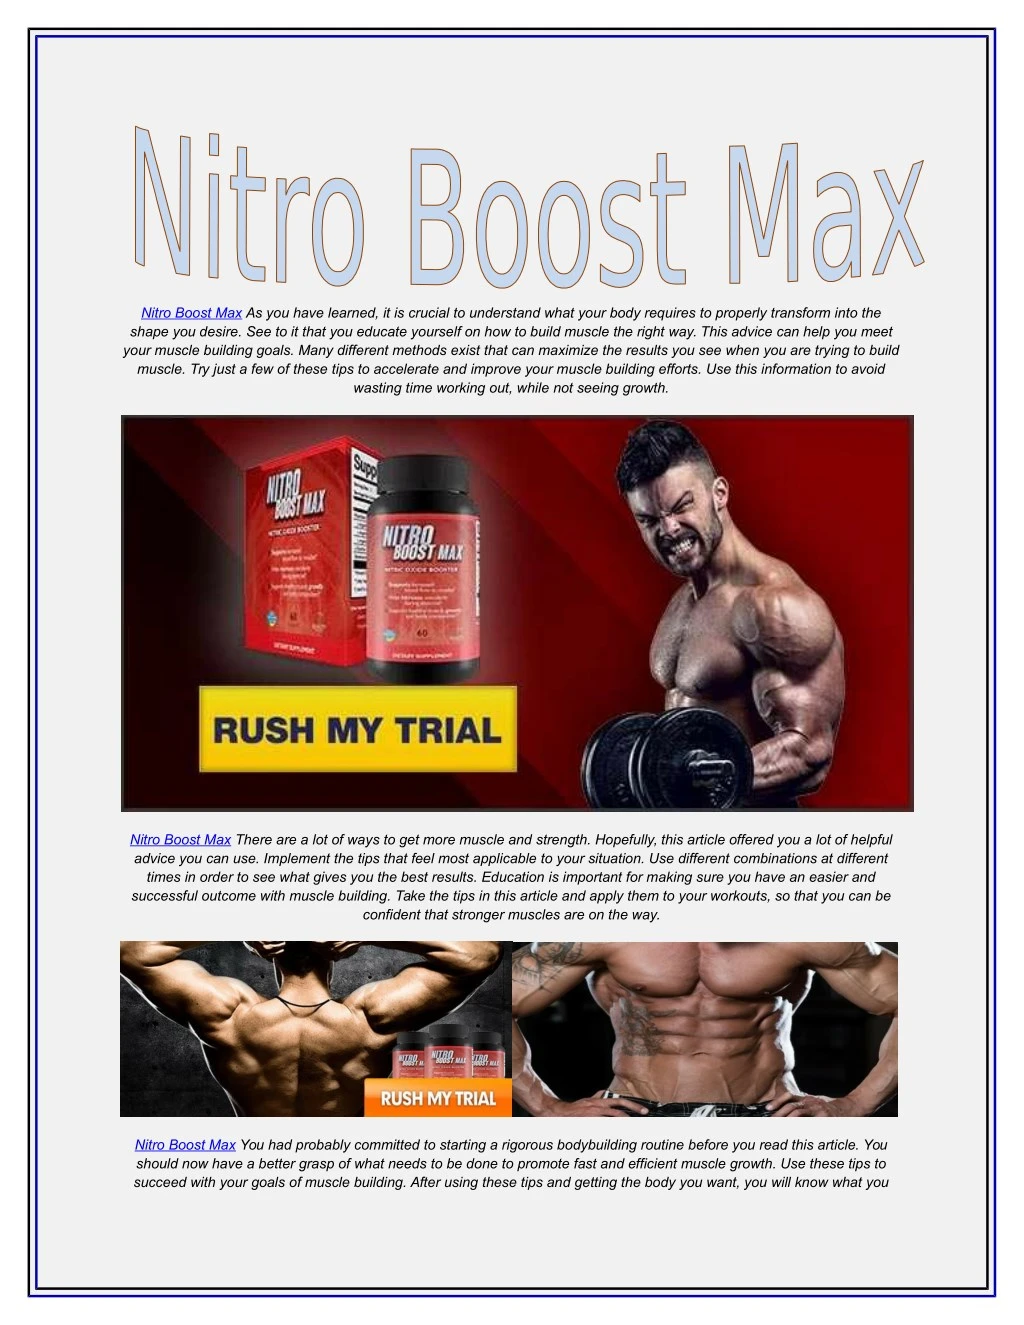 nitro boost max as you have learned it is crucial